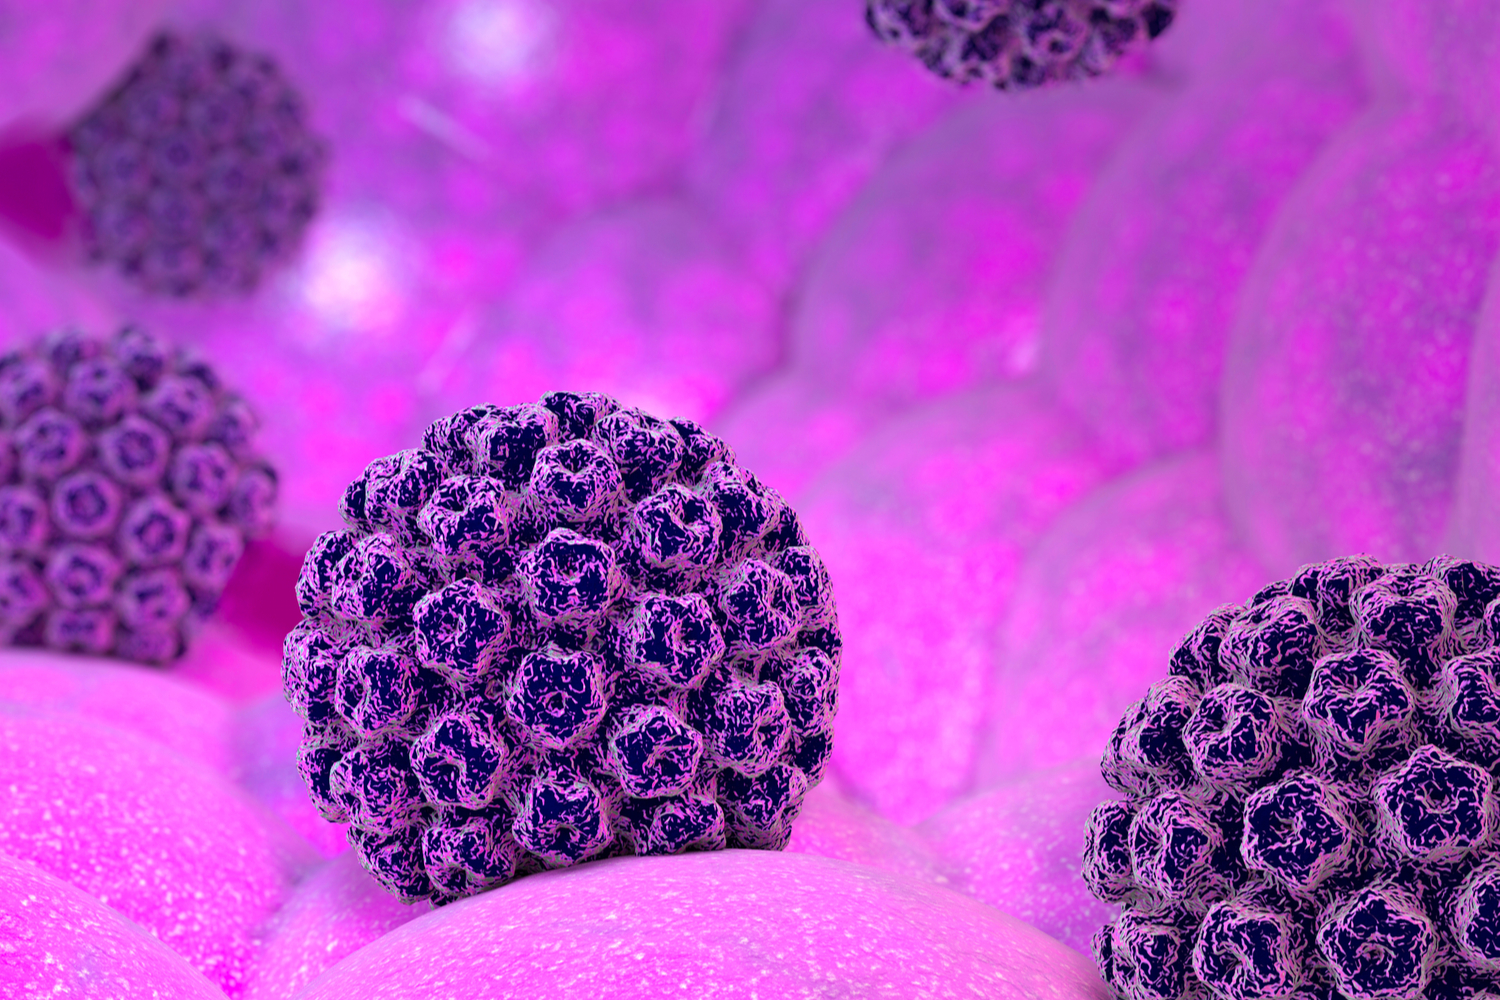 3D rendering of the human papillovirus (HPV). HPV is the most commonly spread sexually transmitted disease but spread can be prevented with the HPV vaccine.